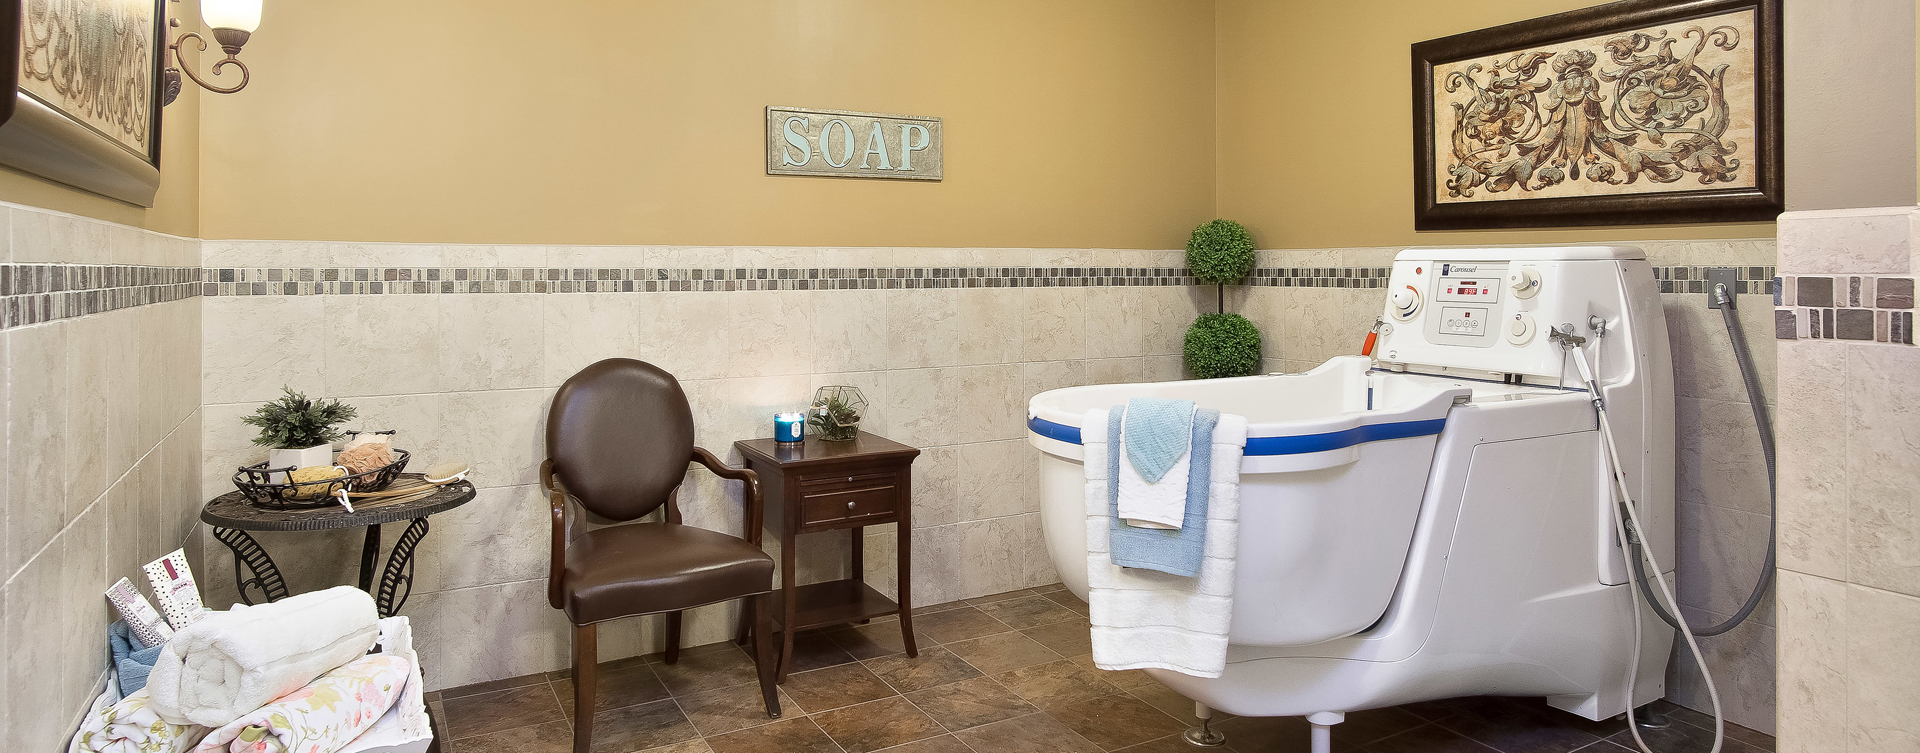 Our whirlpool bathtub creates a spa-like environment tailored to enhance your relaxation and enjoyment at Bickford of Overland Park